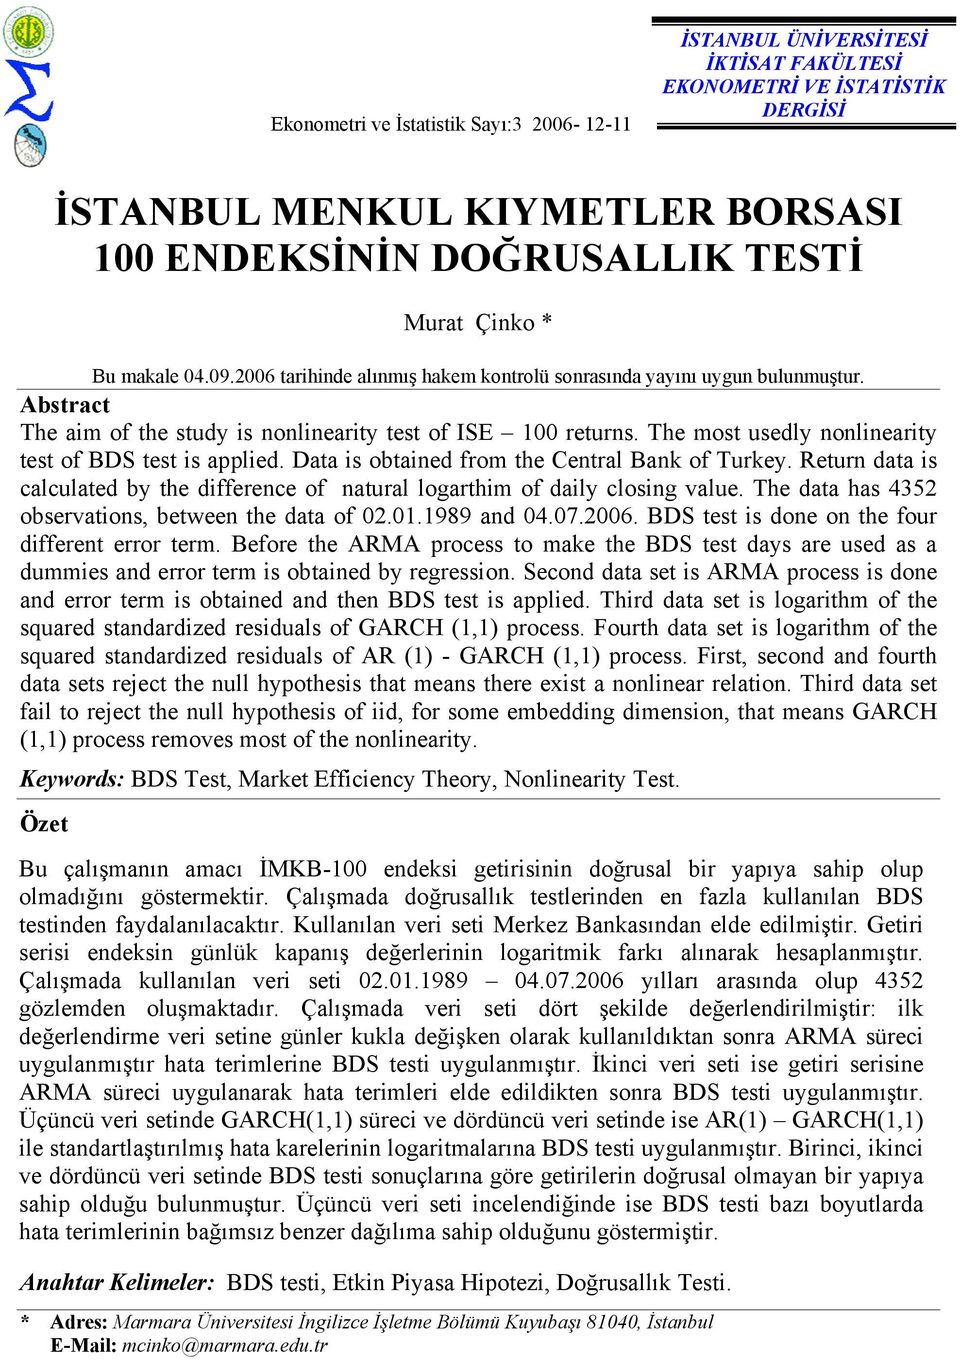 The most usedly nonlinearity test of BDS test is applied. Data is obtained from the Central Bank of Turkey. Return data is calculated by the difference of natural logarthim of daily closing value.